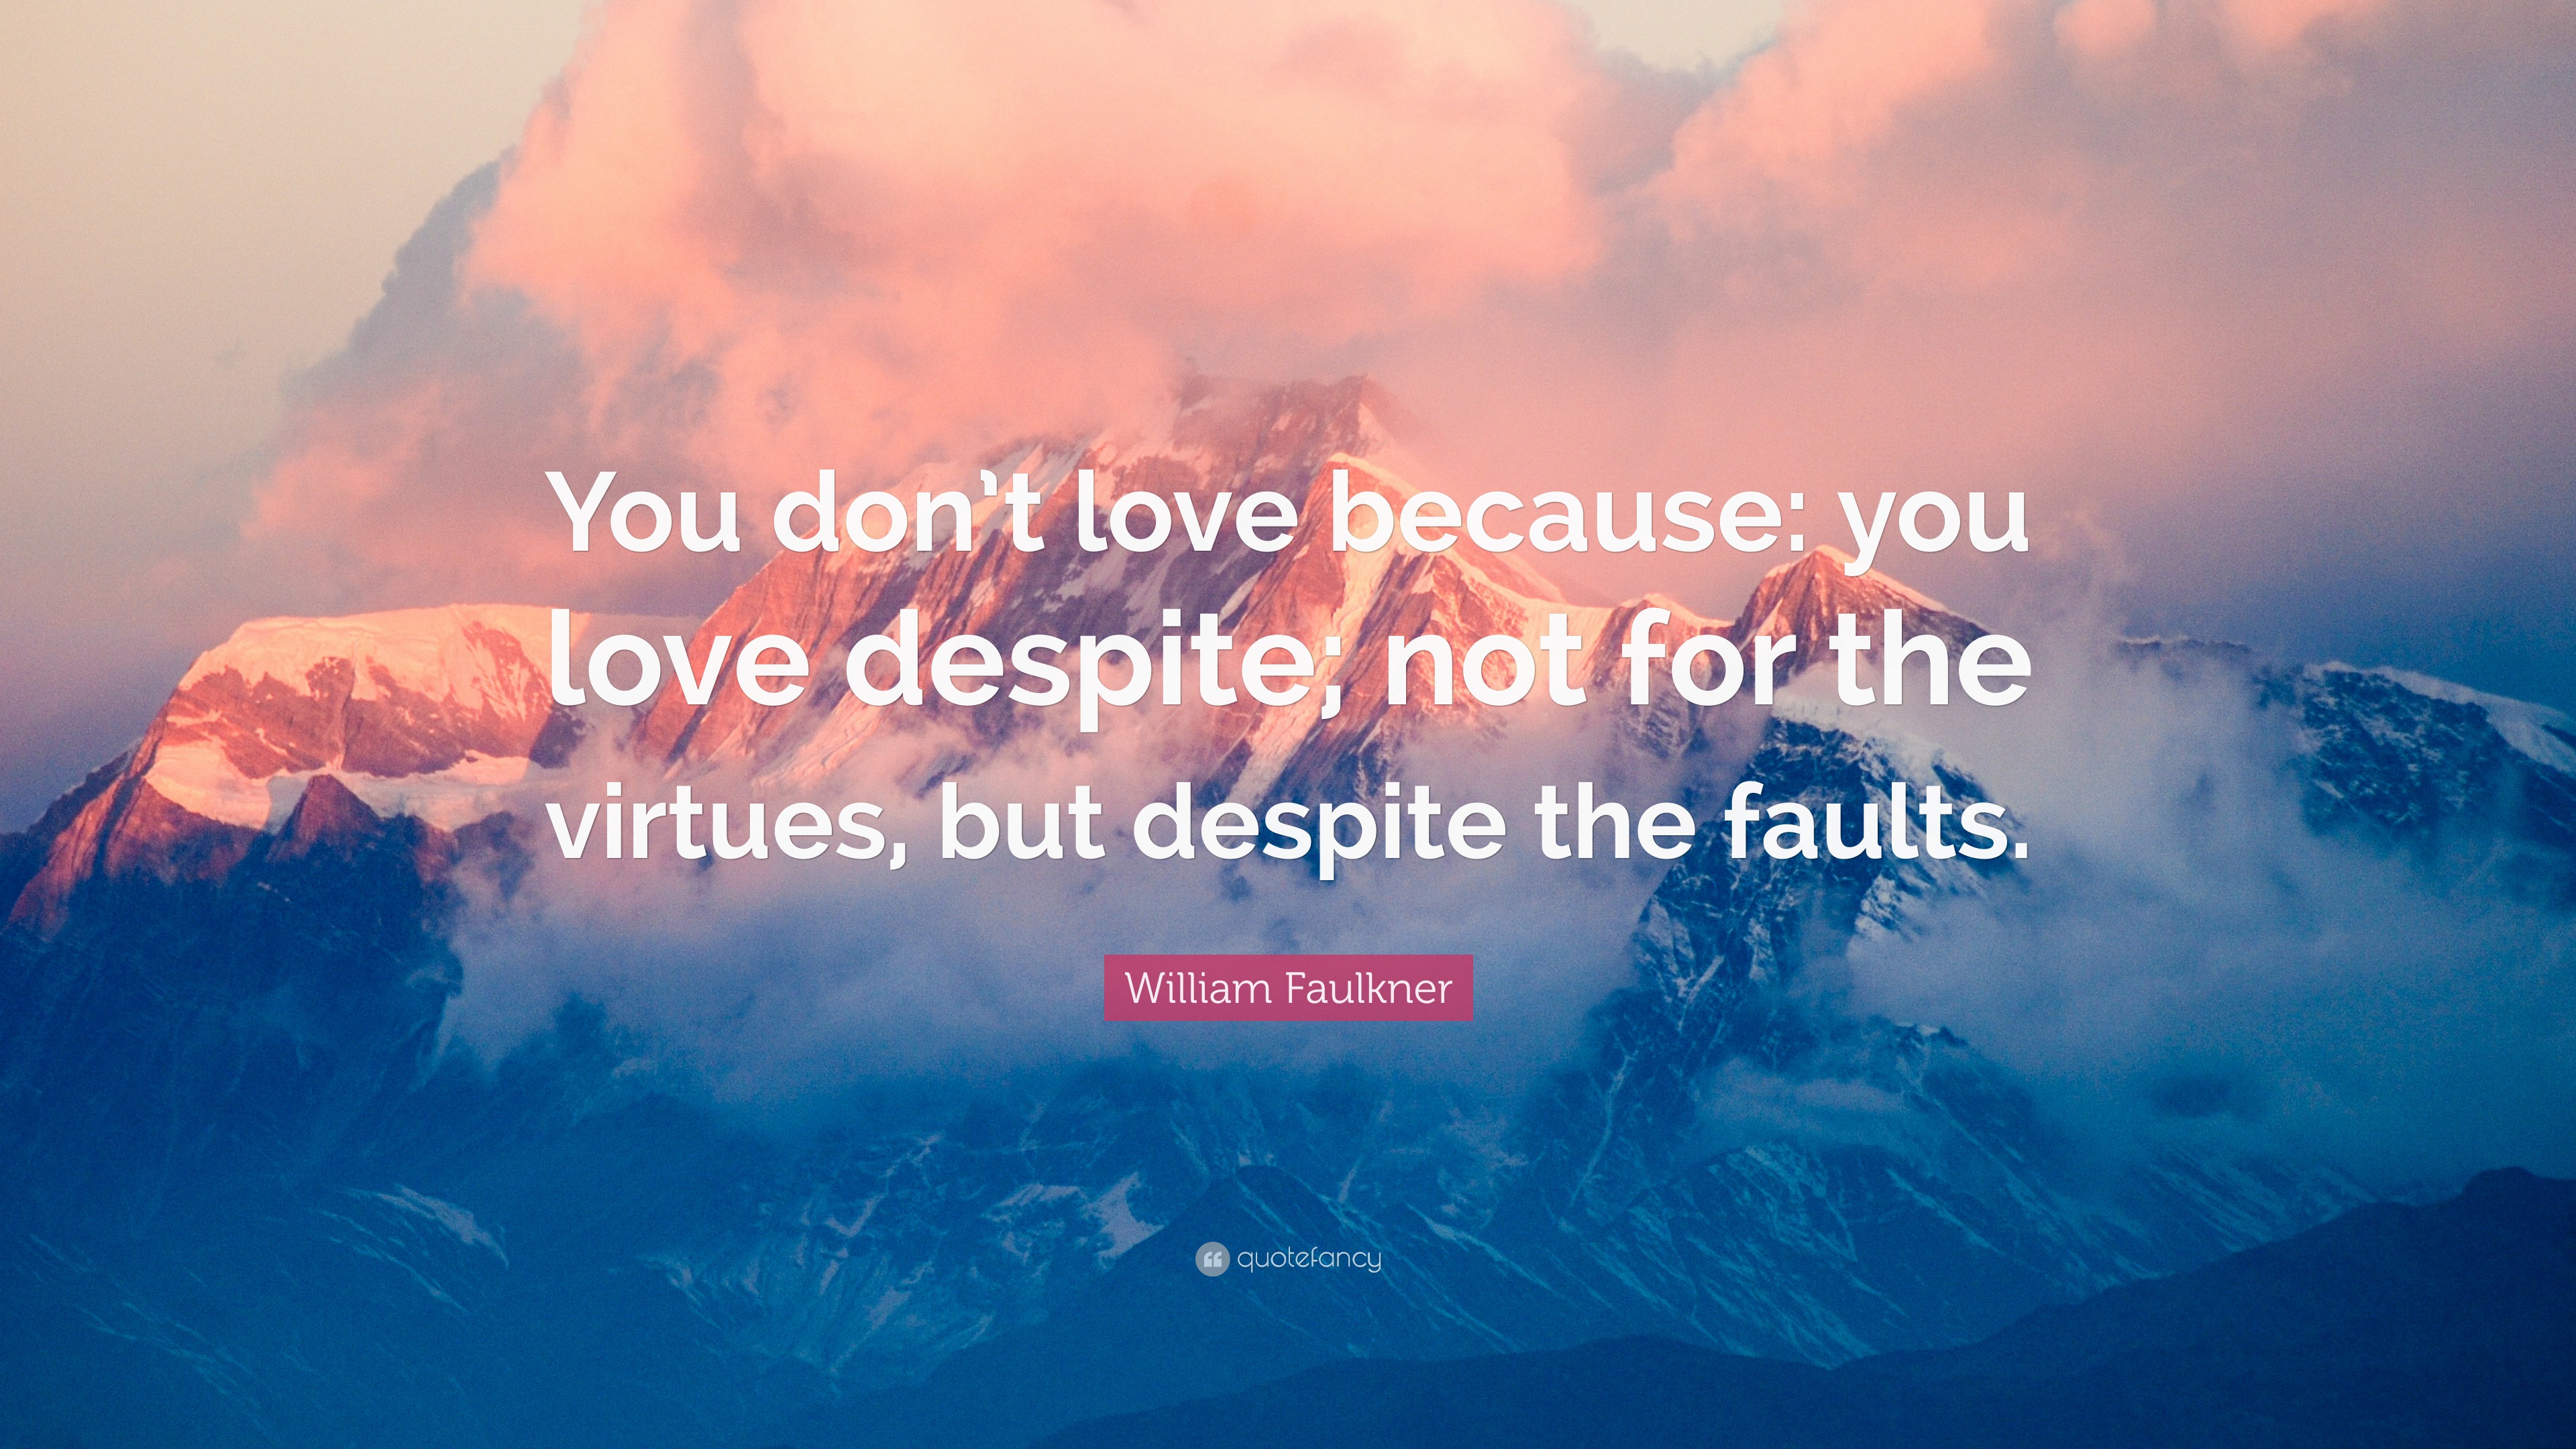 William Faulkner Quote You Don T Love Because You Love Despite Not For The Virtues But Despite The Faults 10 Wallpapers Quotefancy